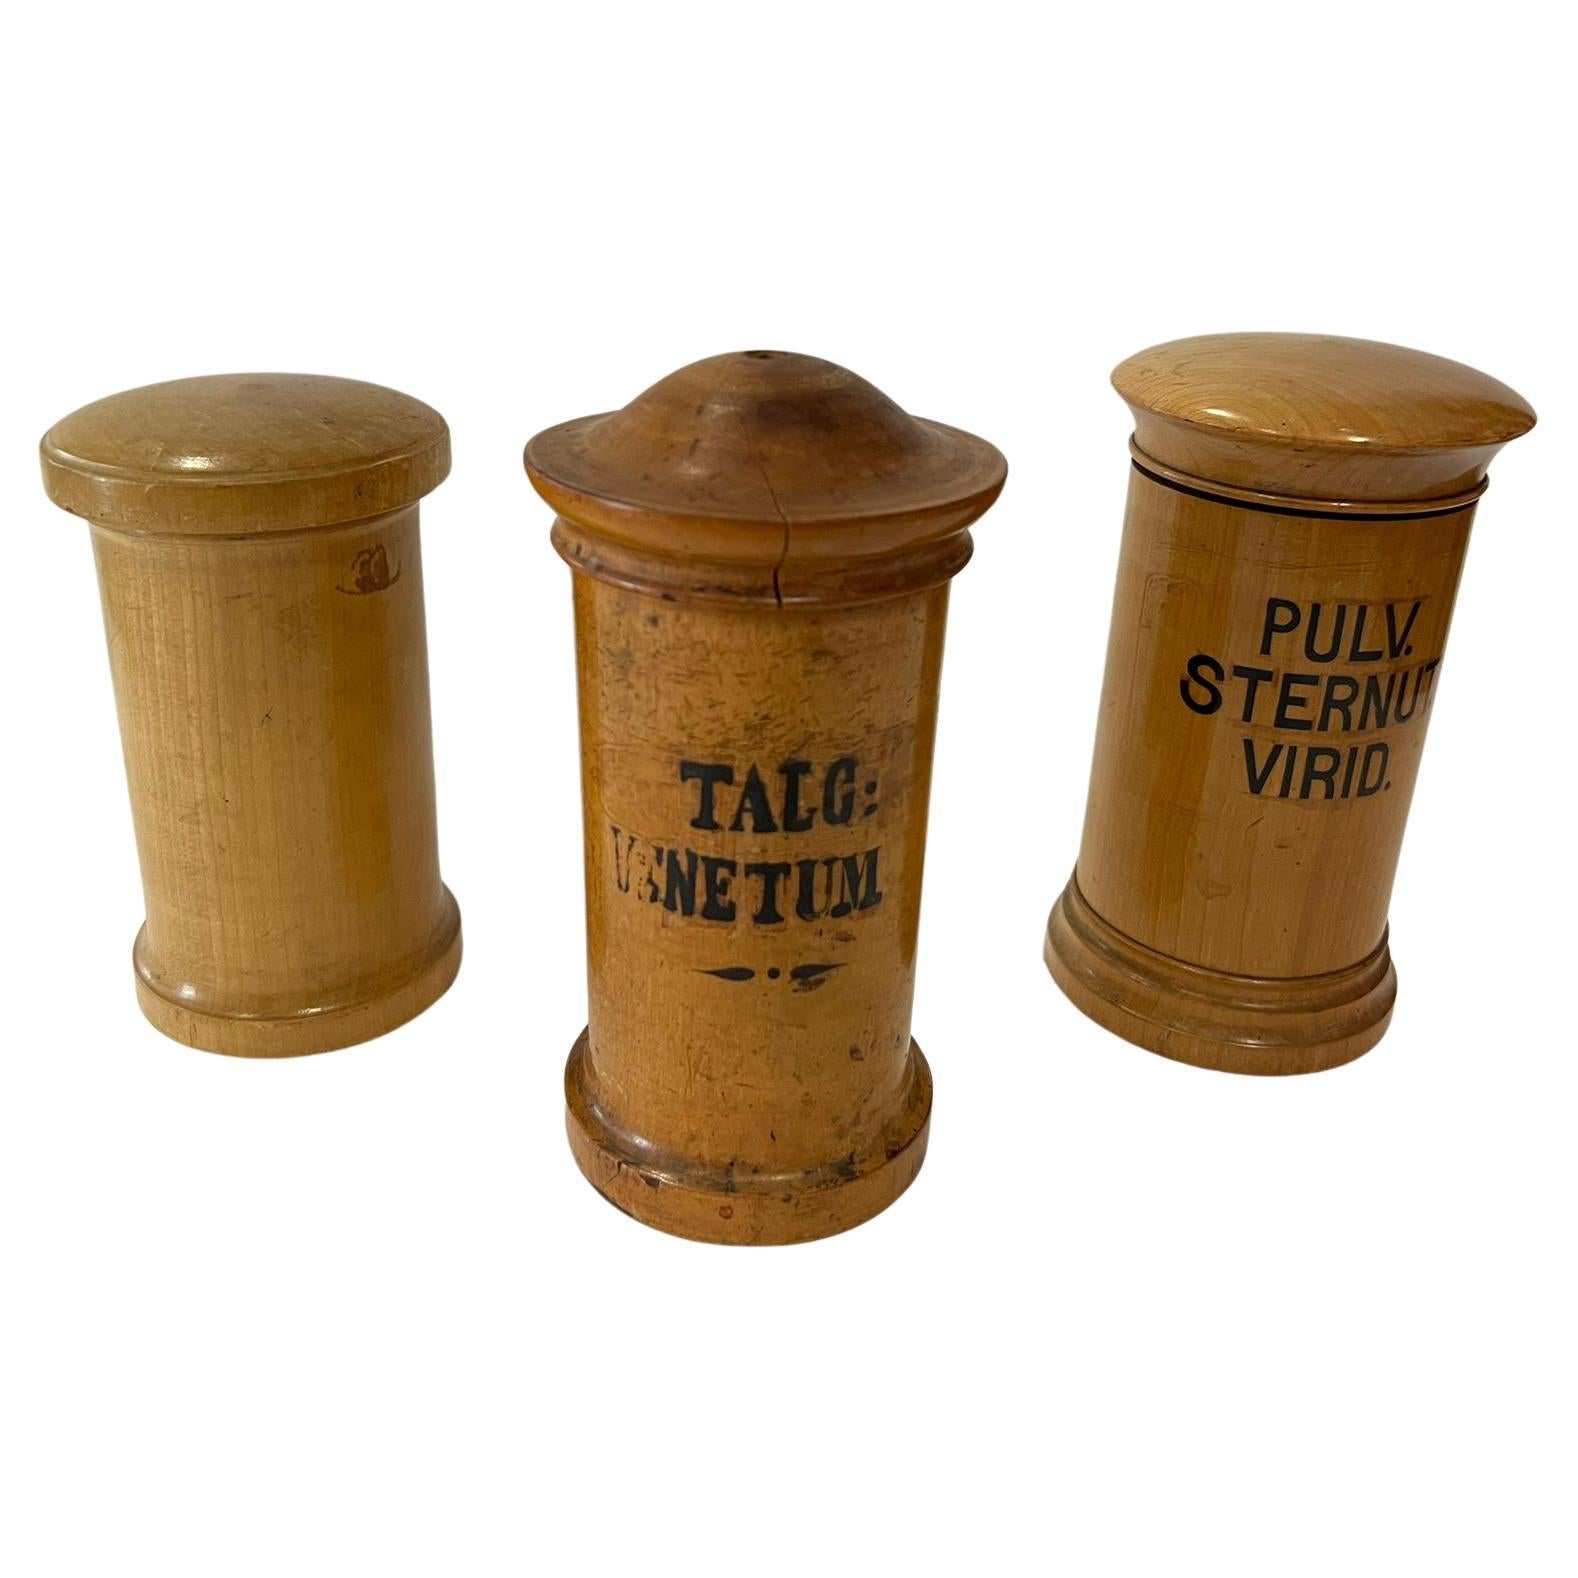 Antique pharmacy vessels made of porcelain and wood from 1900 For Sale 2